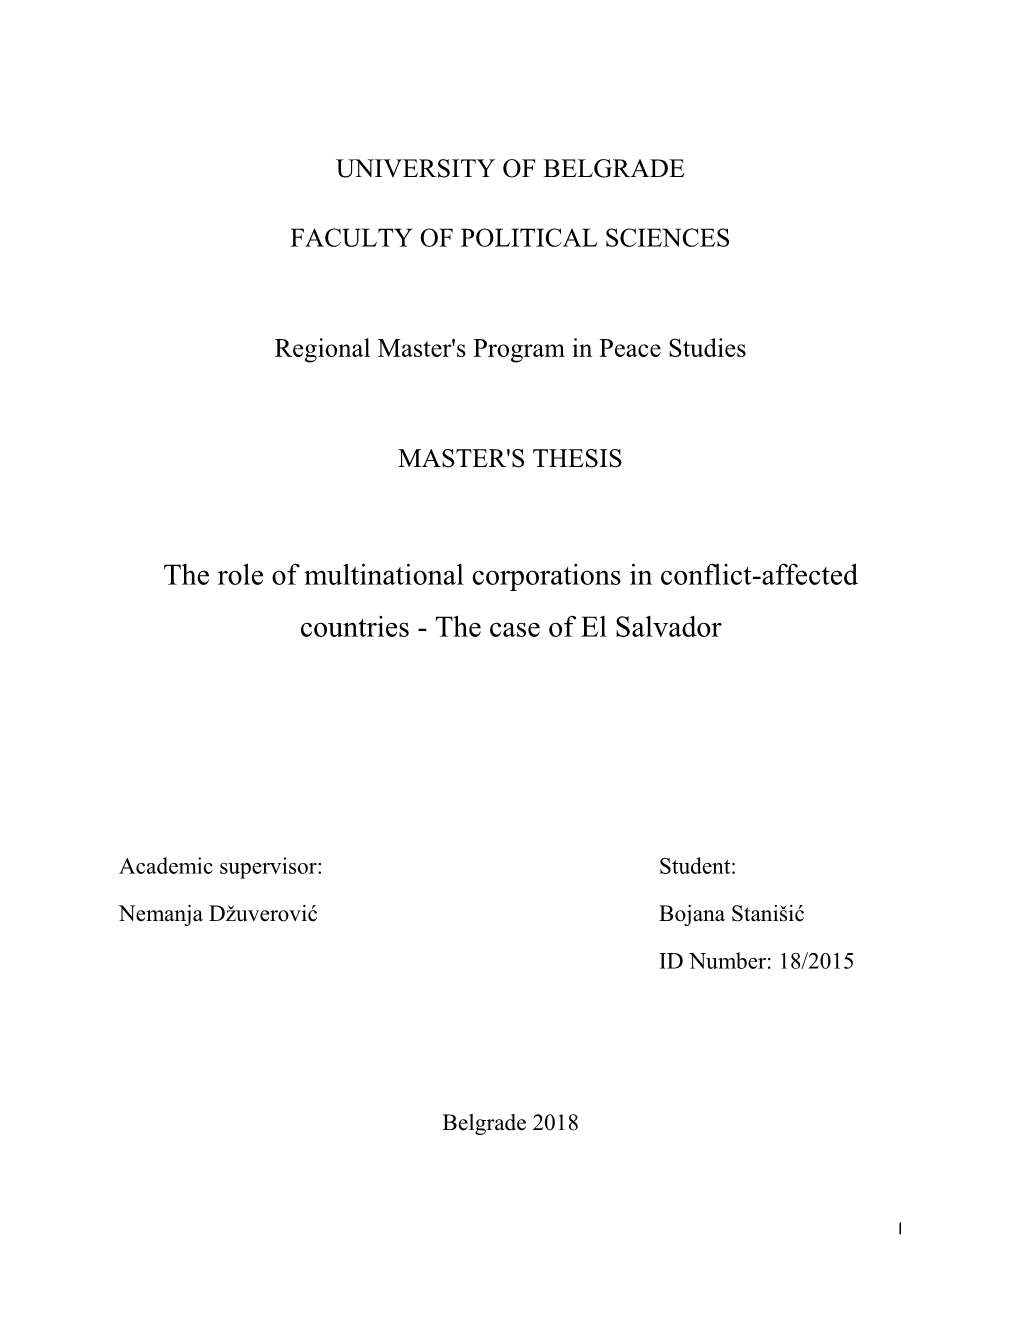 The Role of Multinational Corporations in Conflict-Affected Countries - the Case of El Salvador